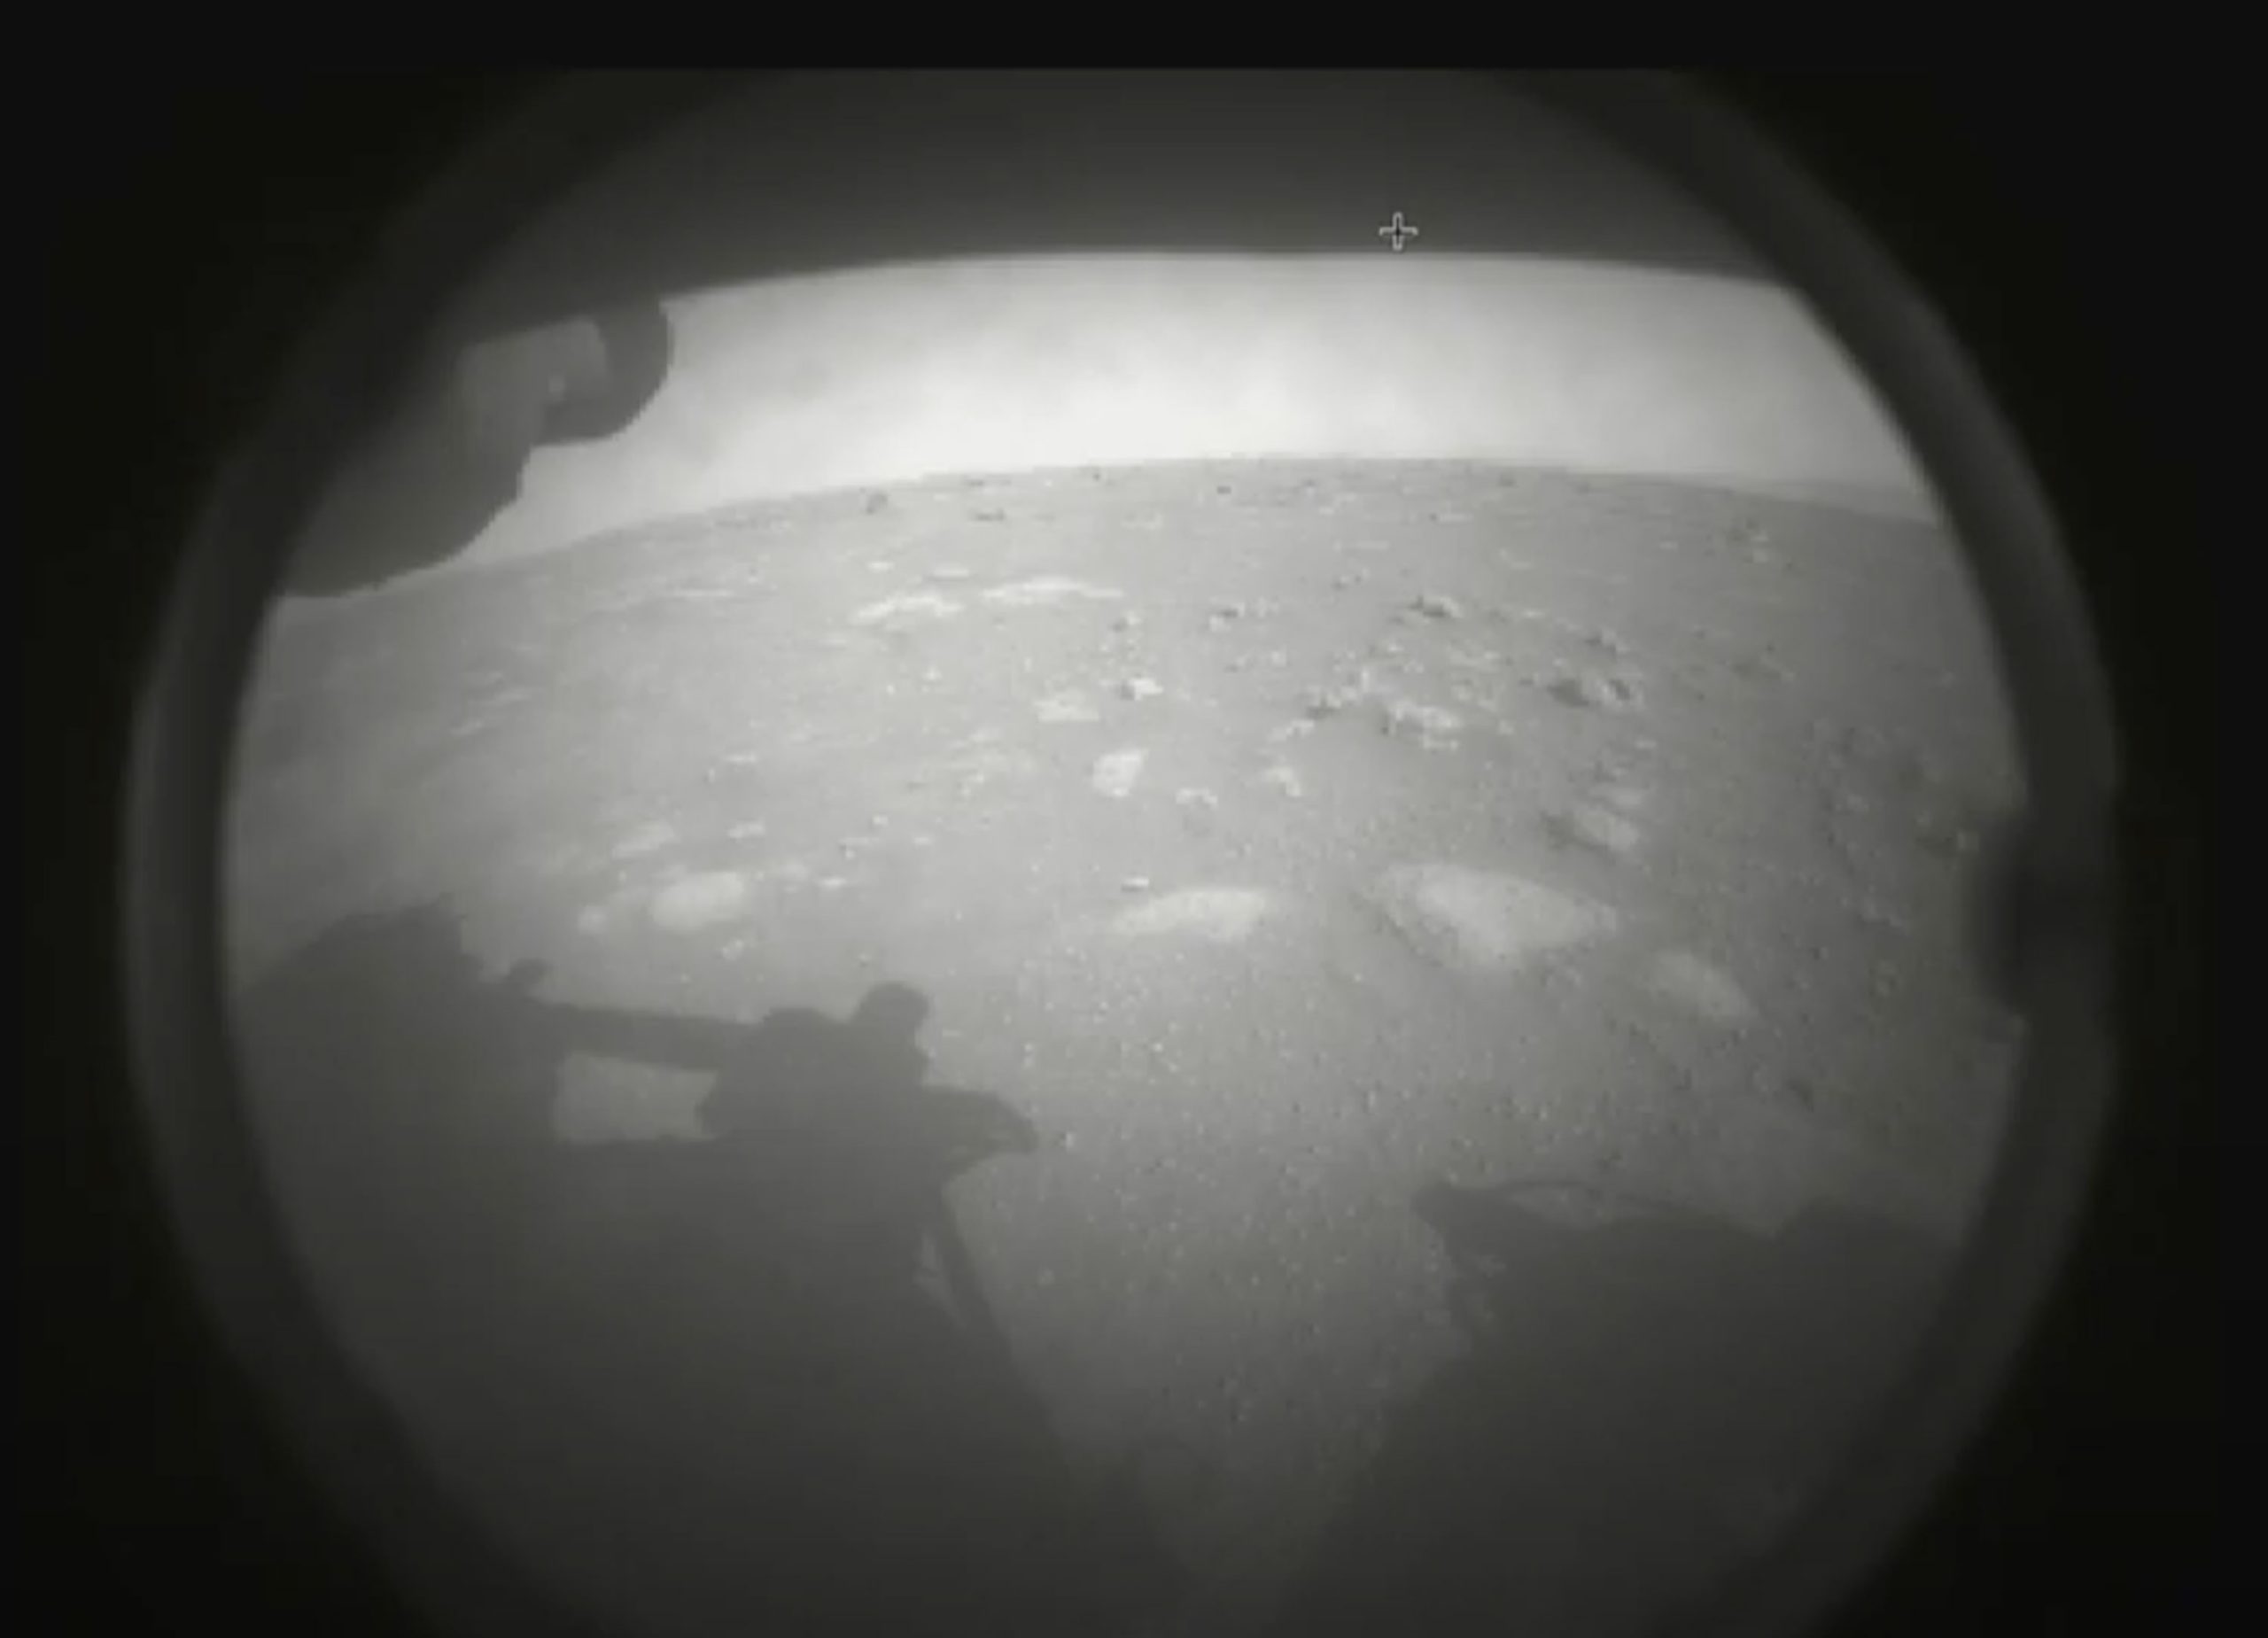 Chatting the Pictures: The “Old Timey” Look of the Second Mars Touch Down